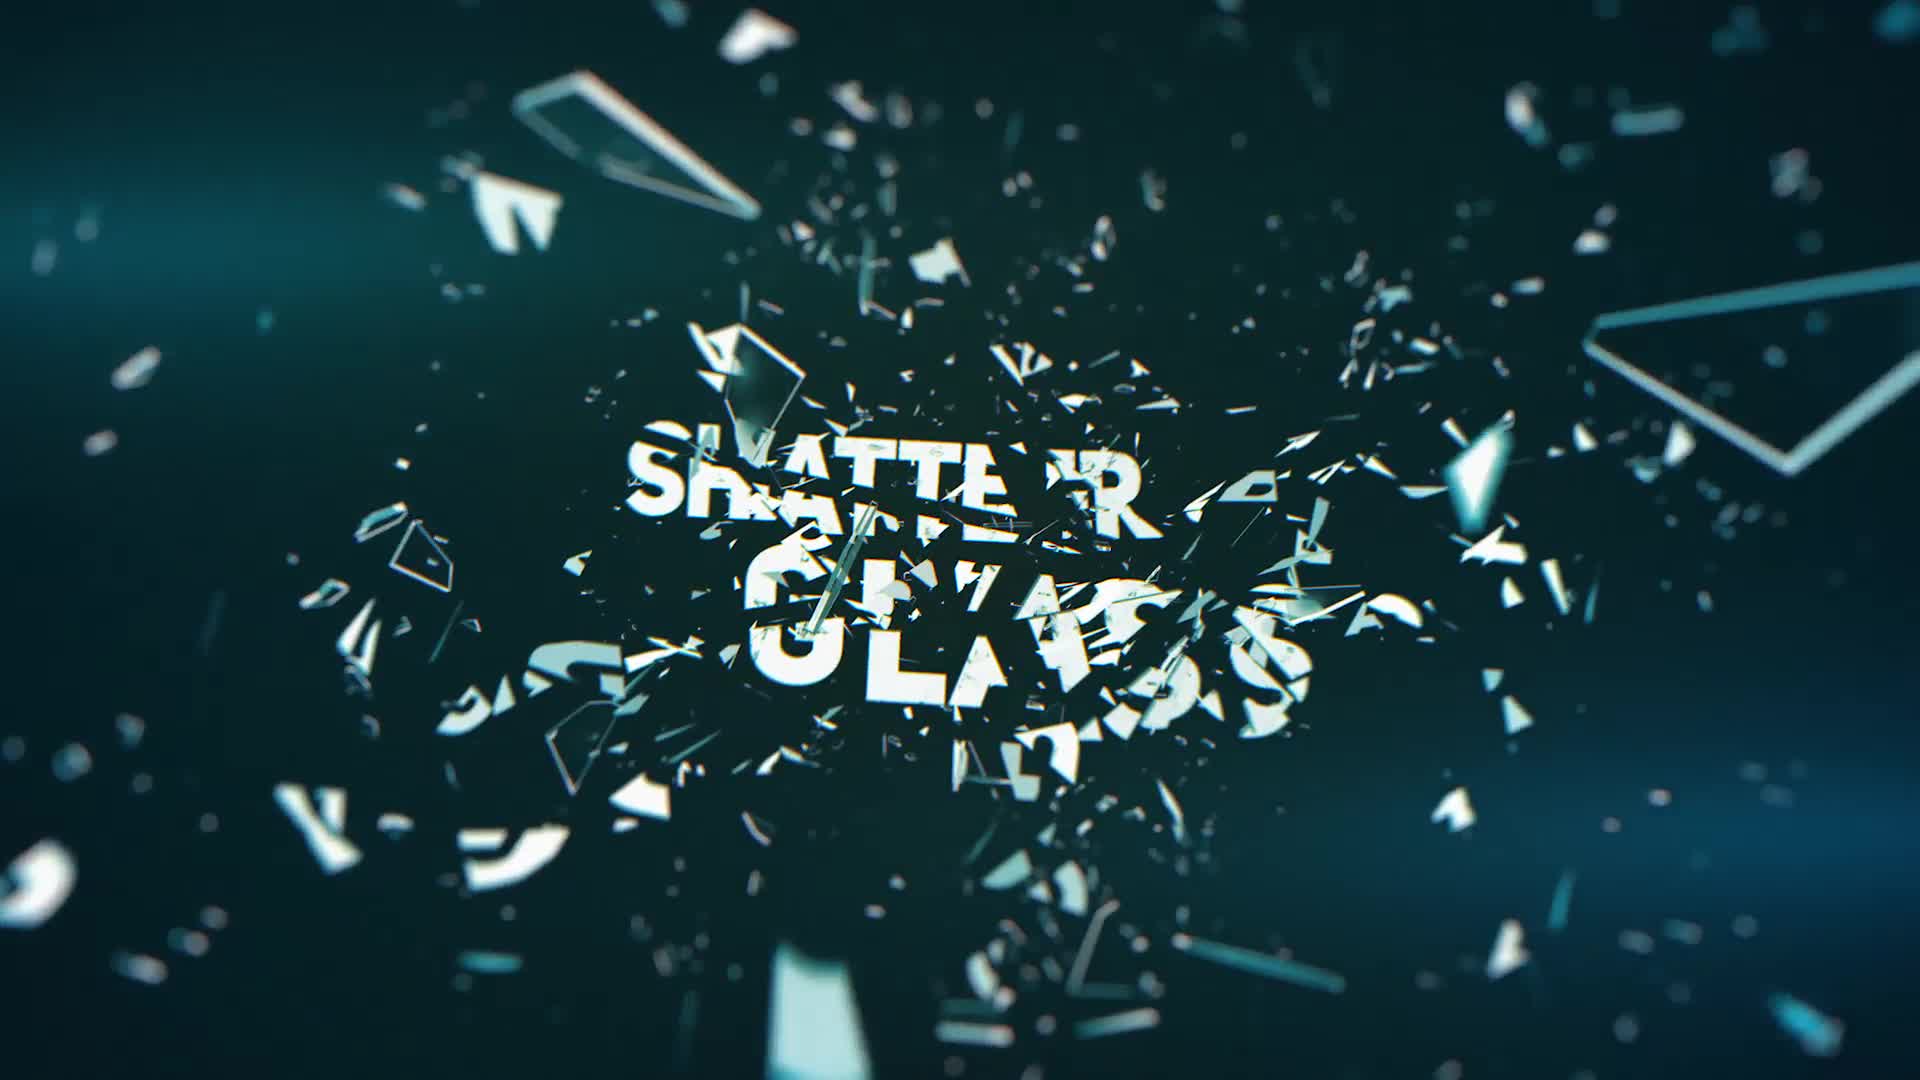 Shatter Glass Trailer Videohive 22992851 Download Direct After Effects